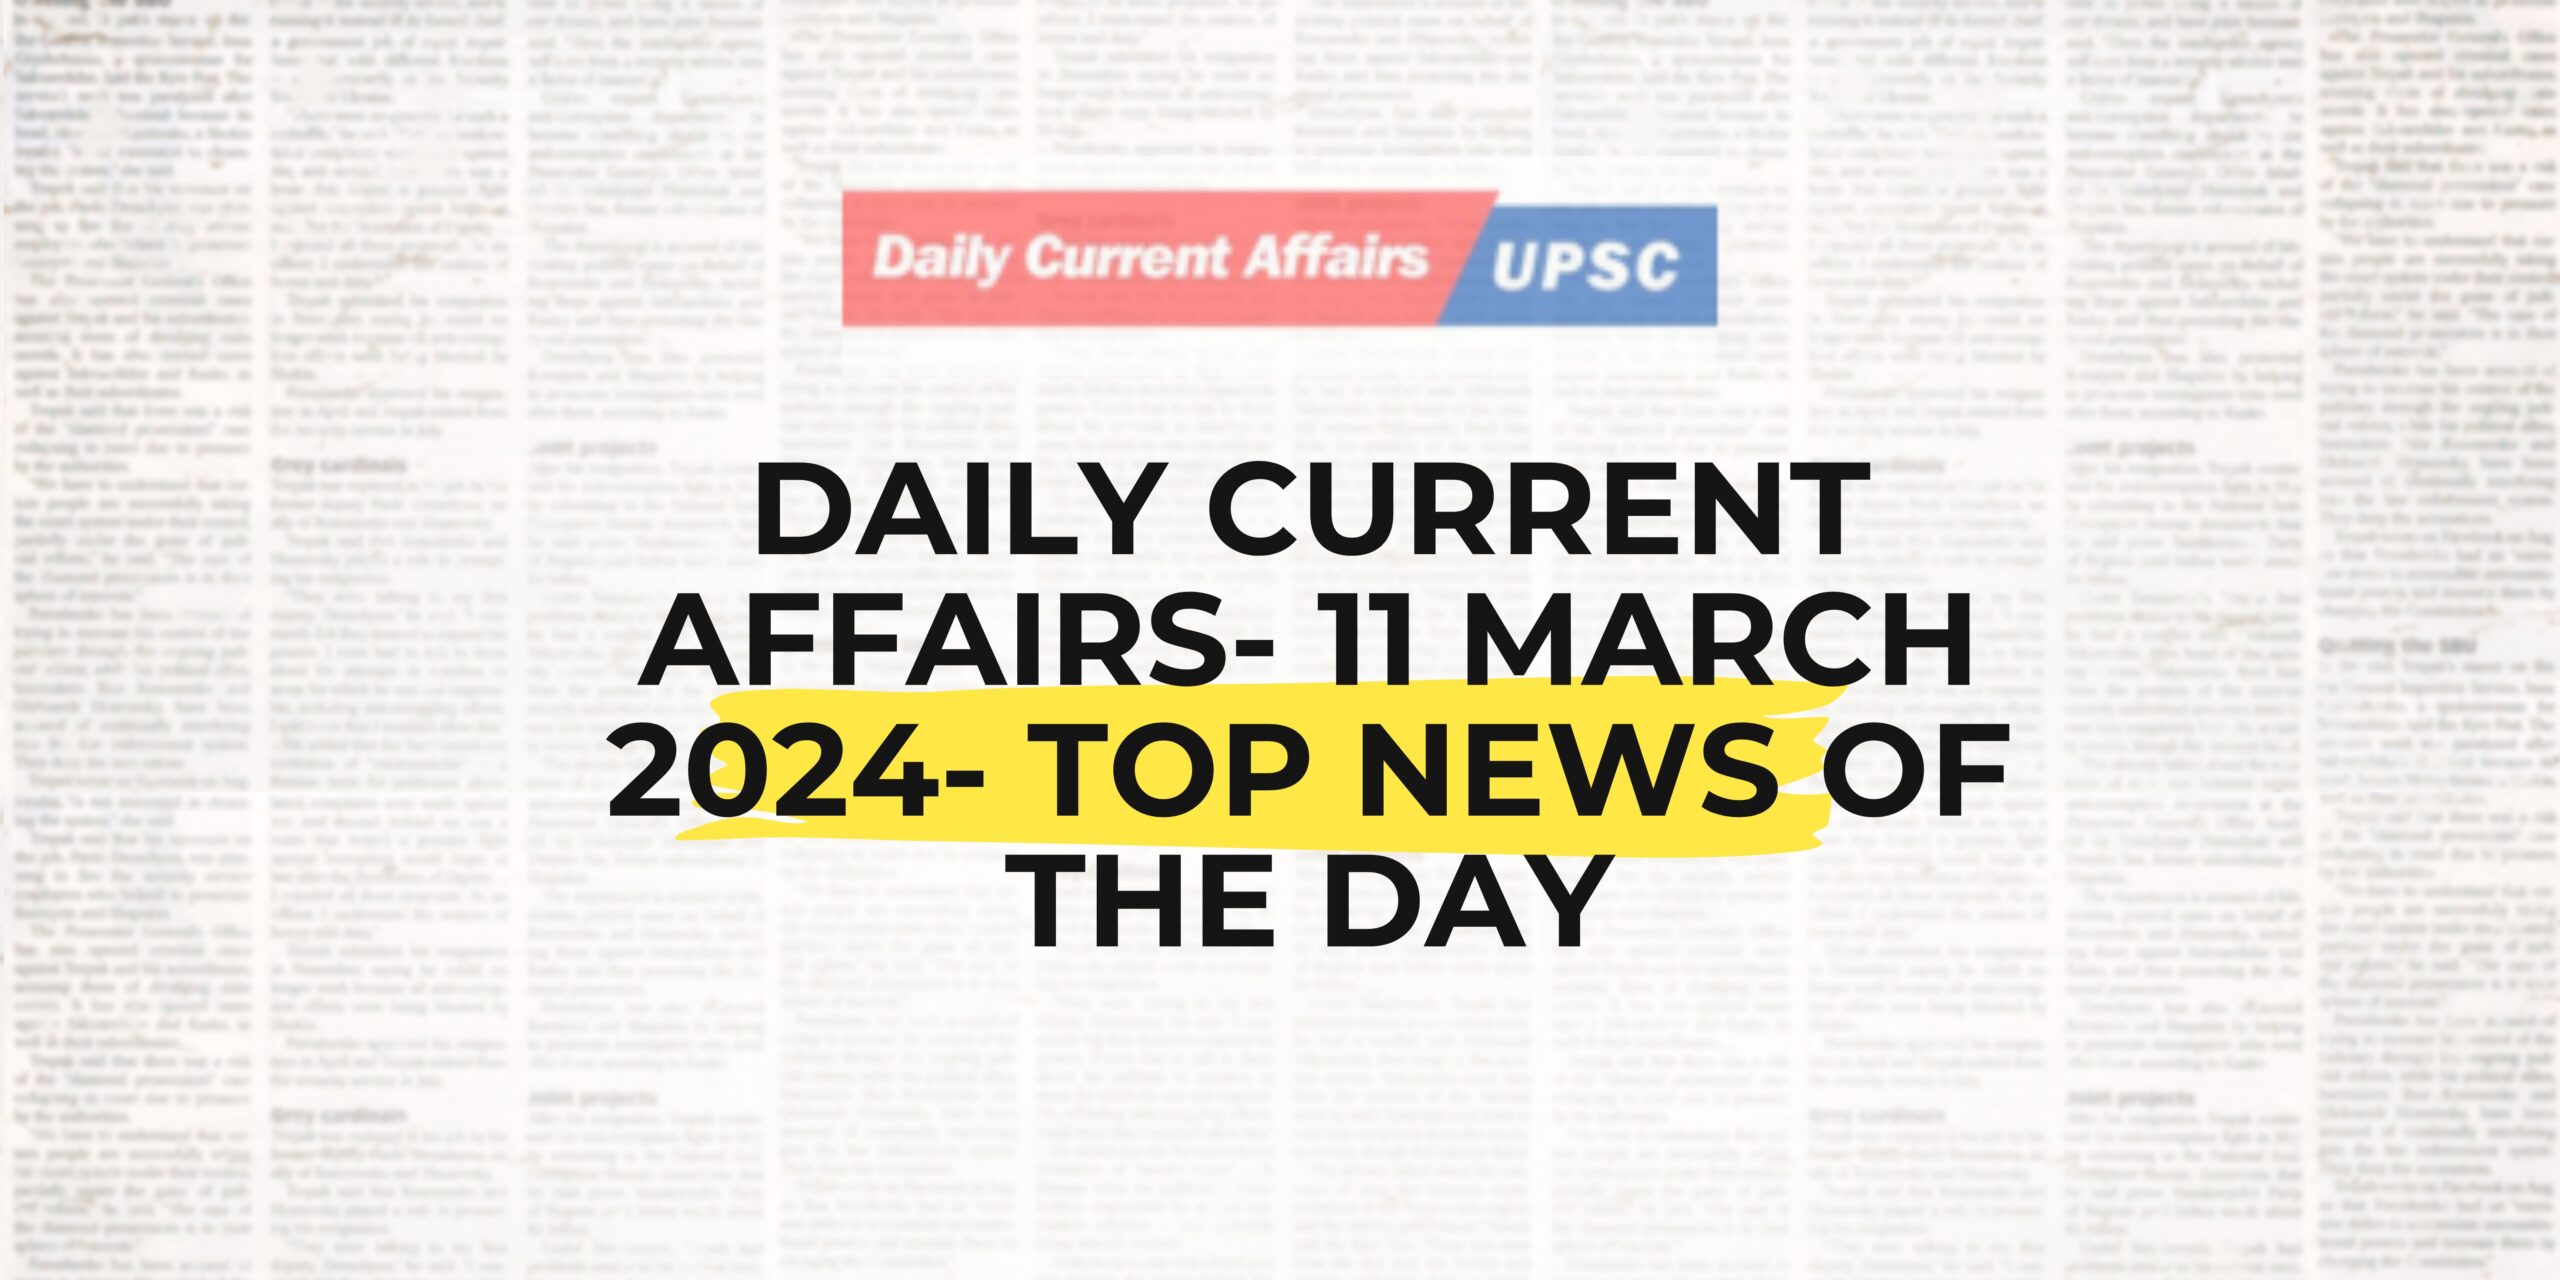 Daily Current Affairs 11 March 2024- Top News Of The Day